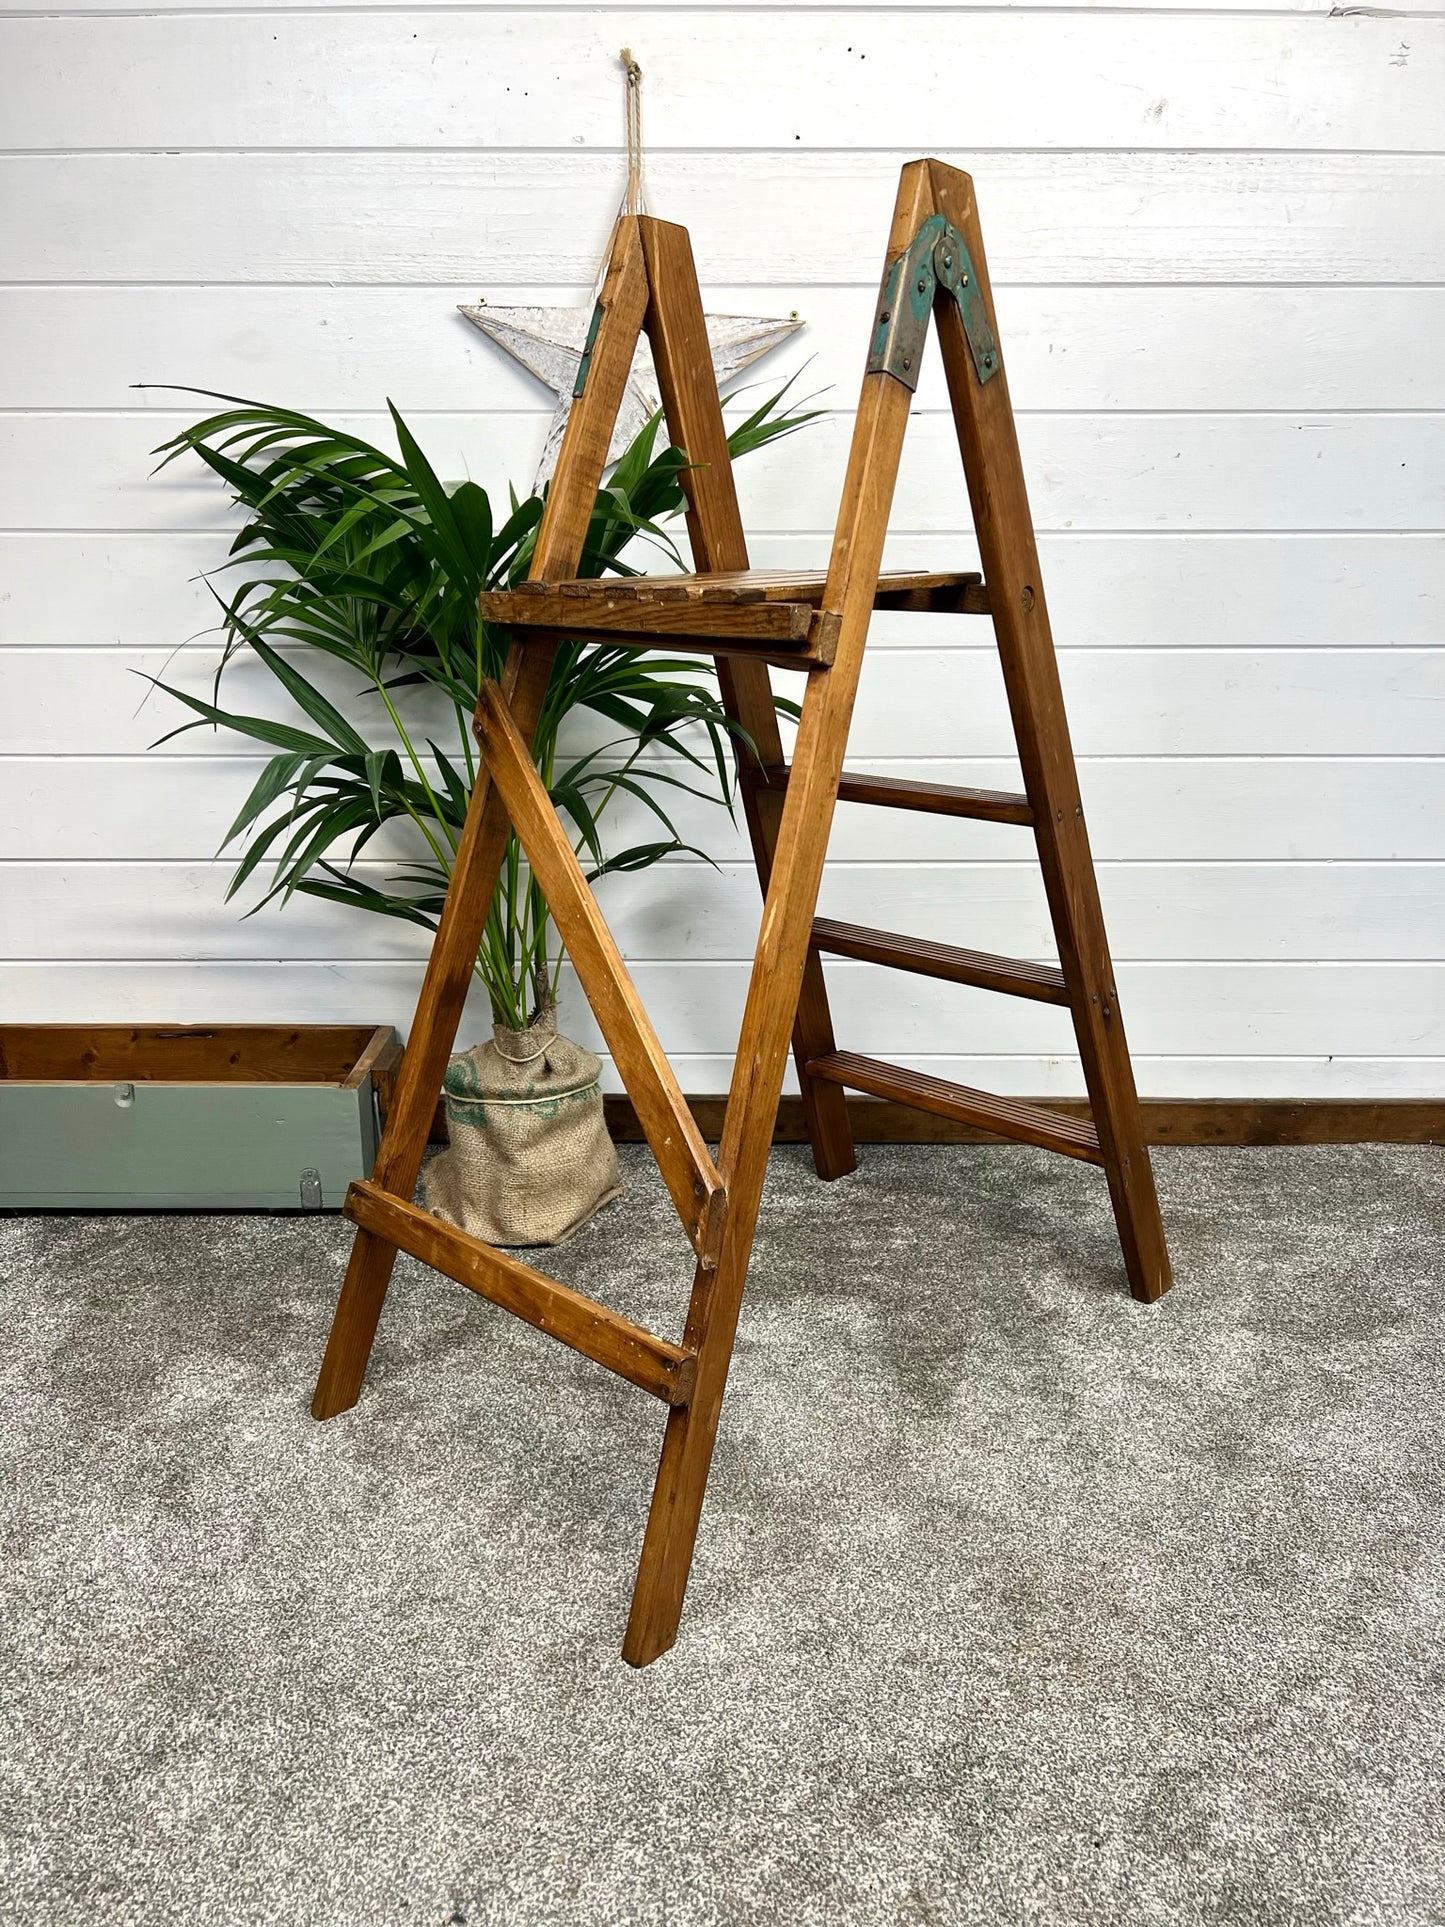 Vintage Wooden Decorative Ladder Reclaimed Waxed Wood Steps Rustic Farmhouse